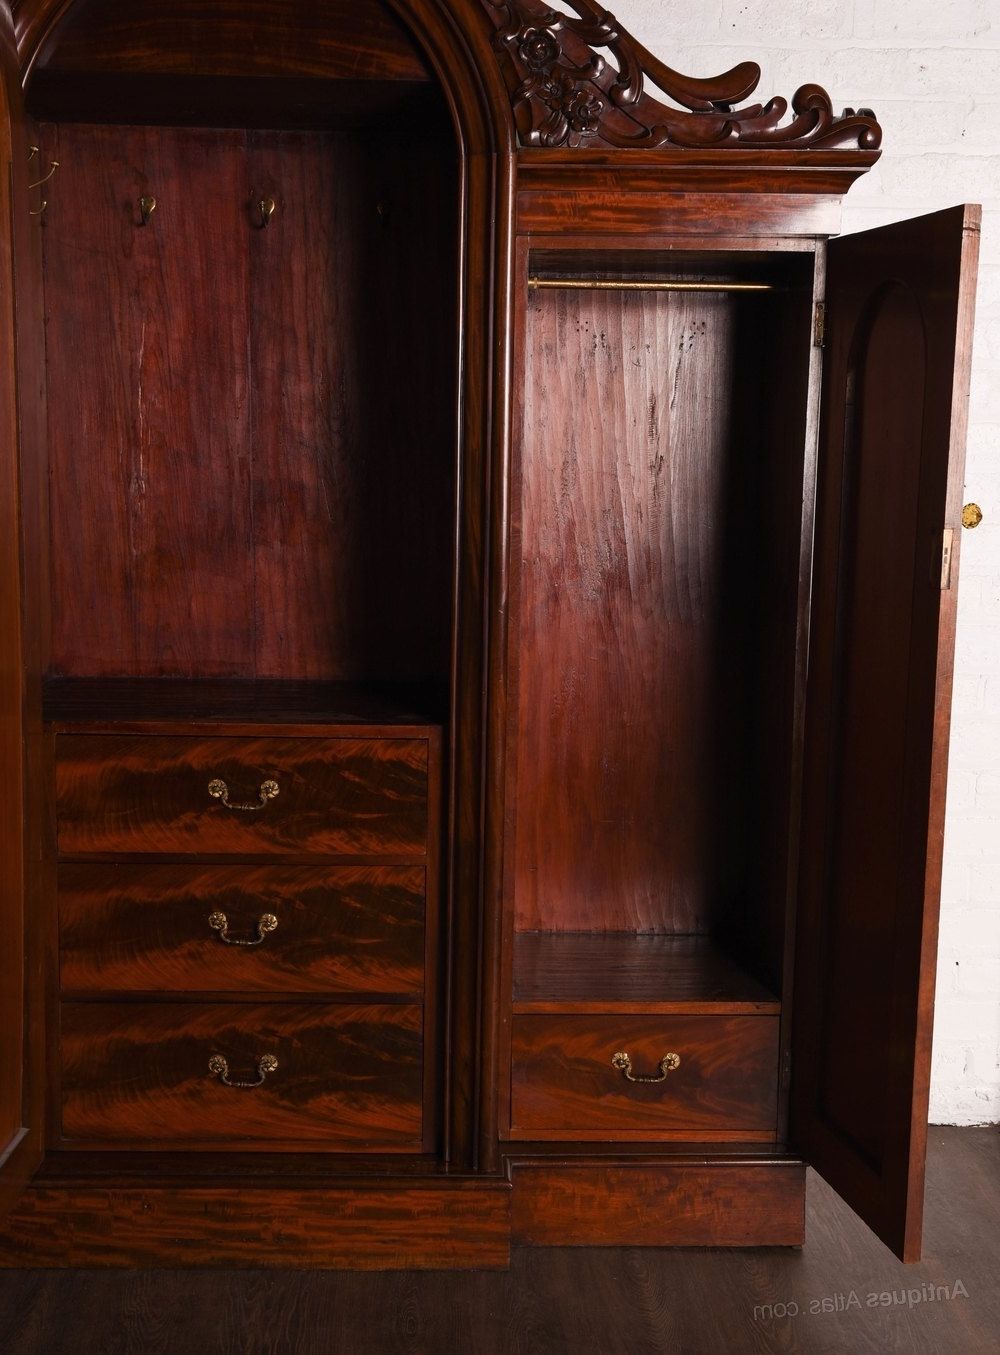 Most Recently Released Breakfront Wardrobes Within Stunning Scottish Victorian Breakfront Wardrobe – Antiques Atlas (View 9 of 15)